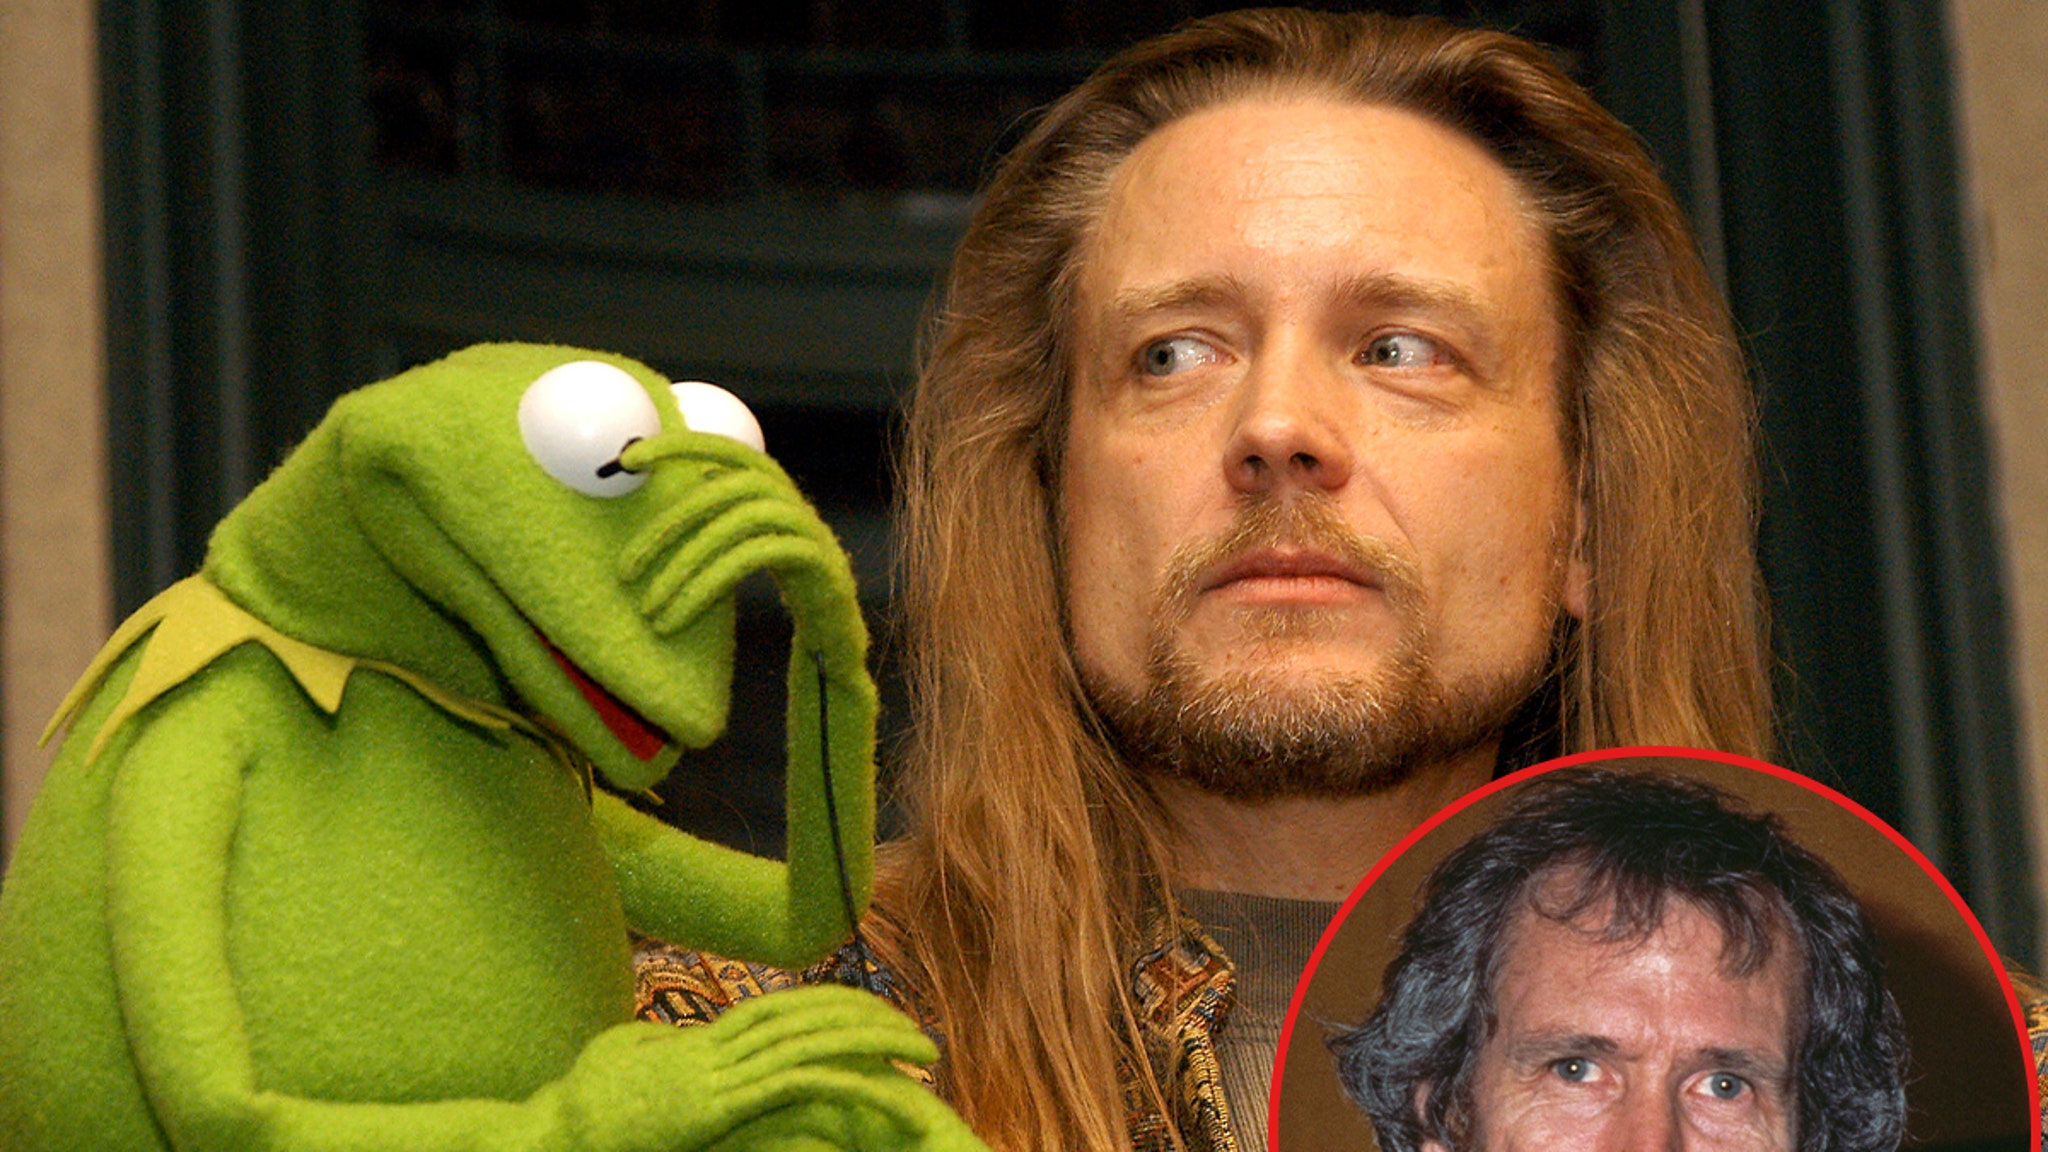 Kermit voice actor says Jim Henson's spirit 'withered' before new documentary